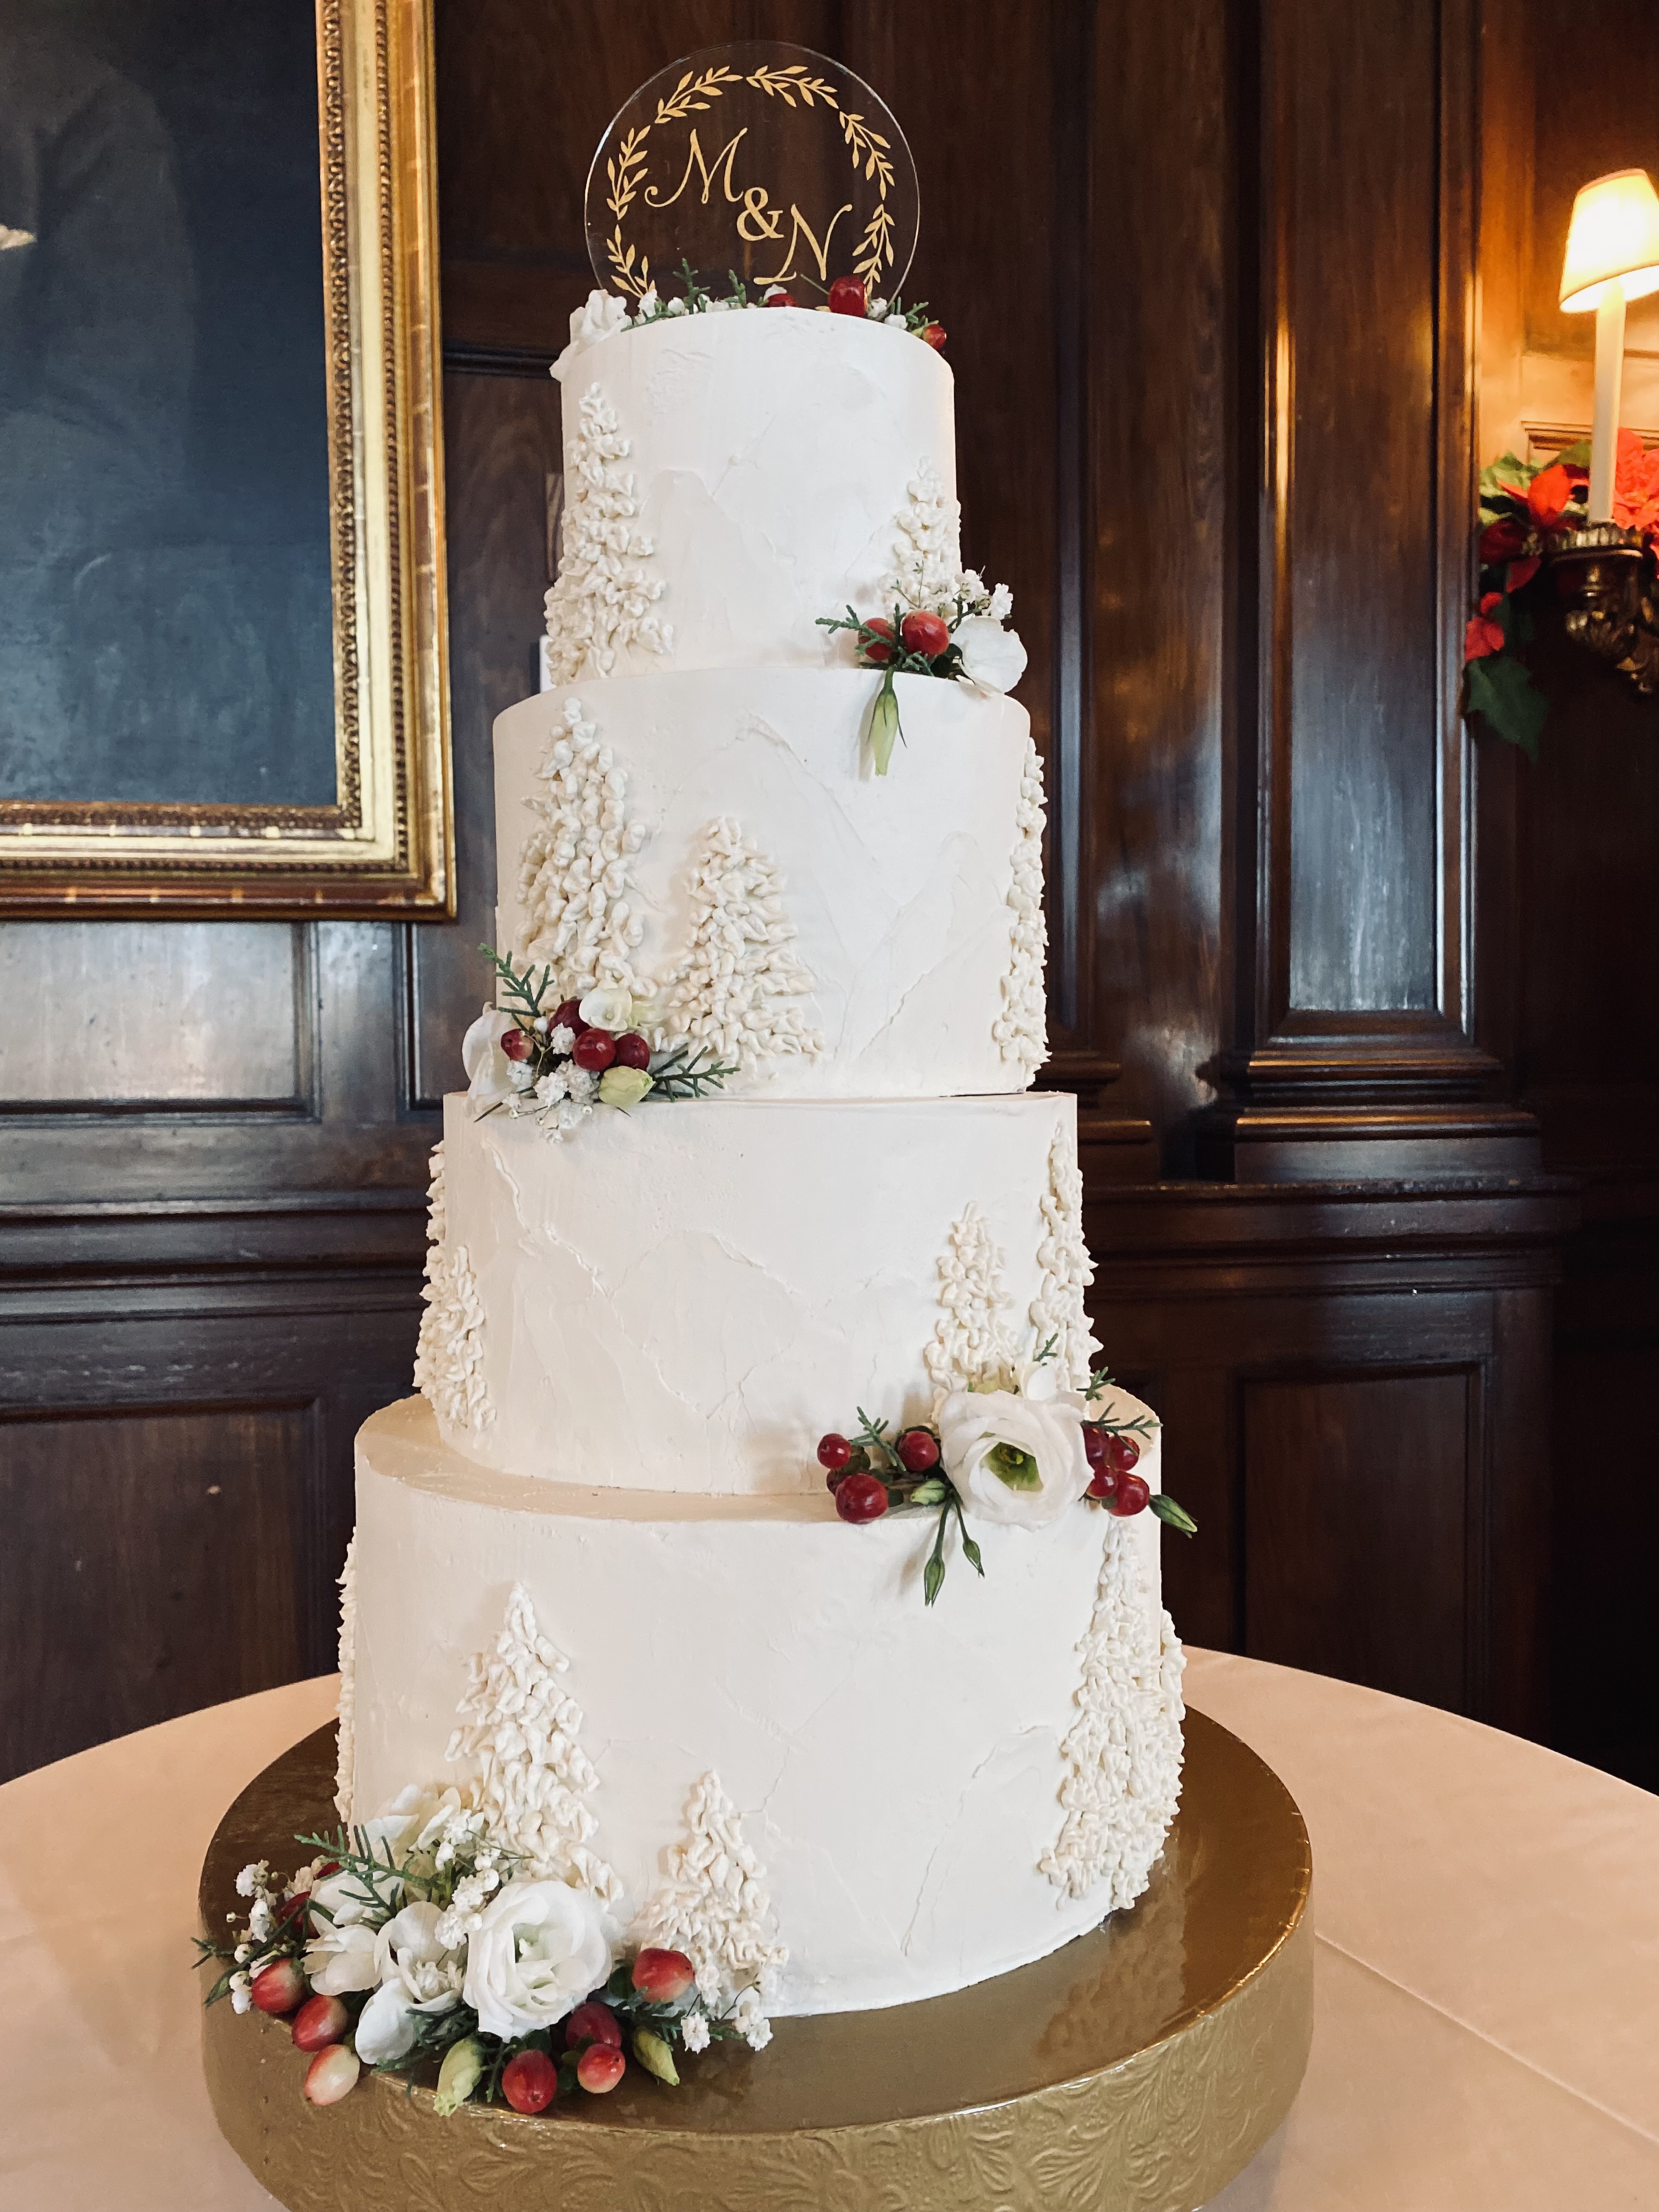 A beautiful 4-tier custom wedding cake with buttercream detail and live flowers from Village Patisserie in Toledo, Ohio